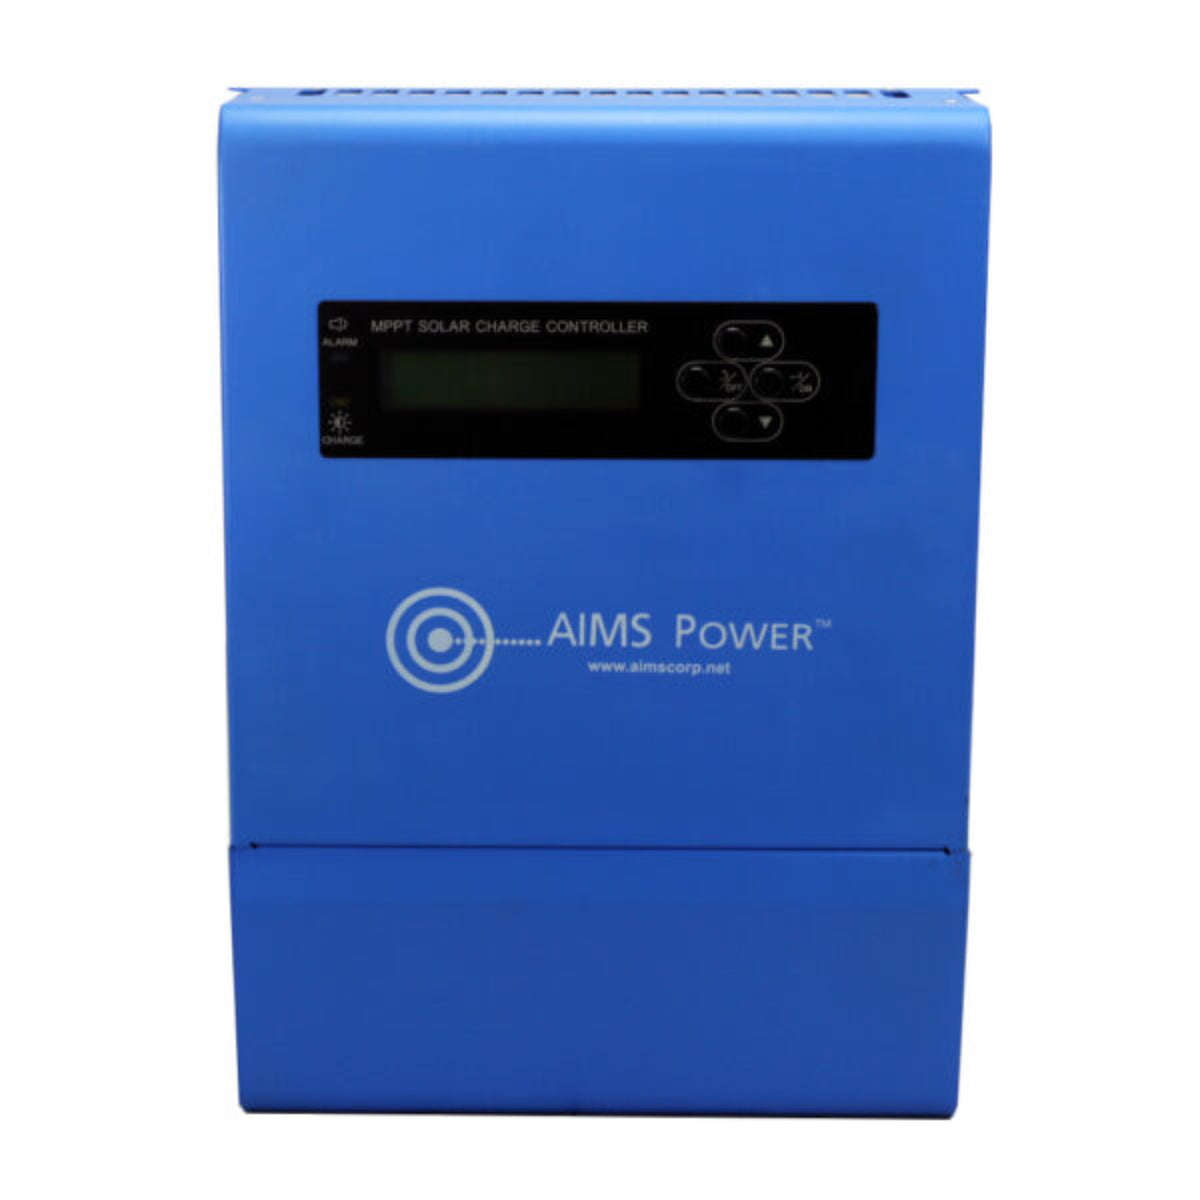 AIMS Power | 40 AMP Solar Charge Controller 12 / 24 / 36 / 48 VDC MPPT